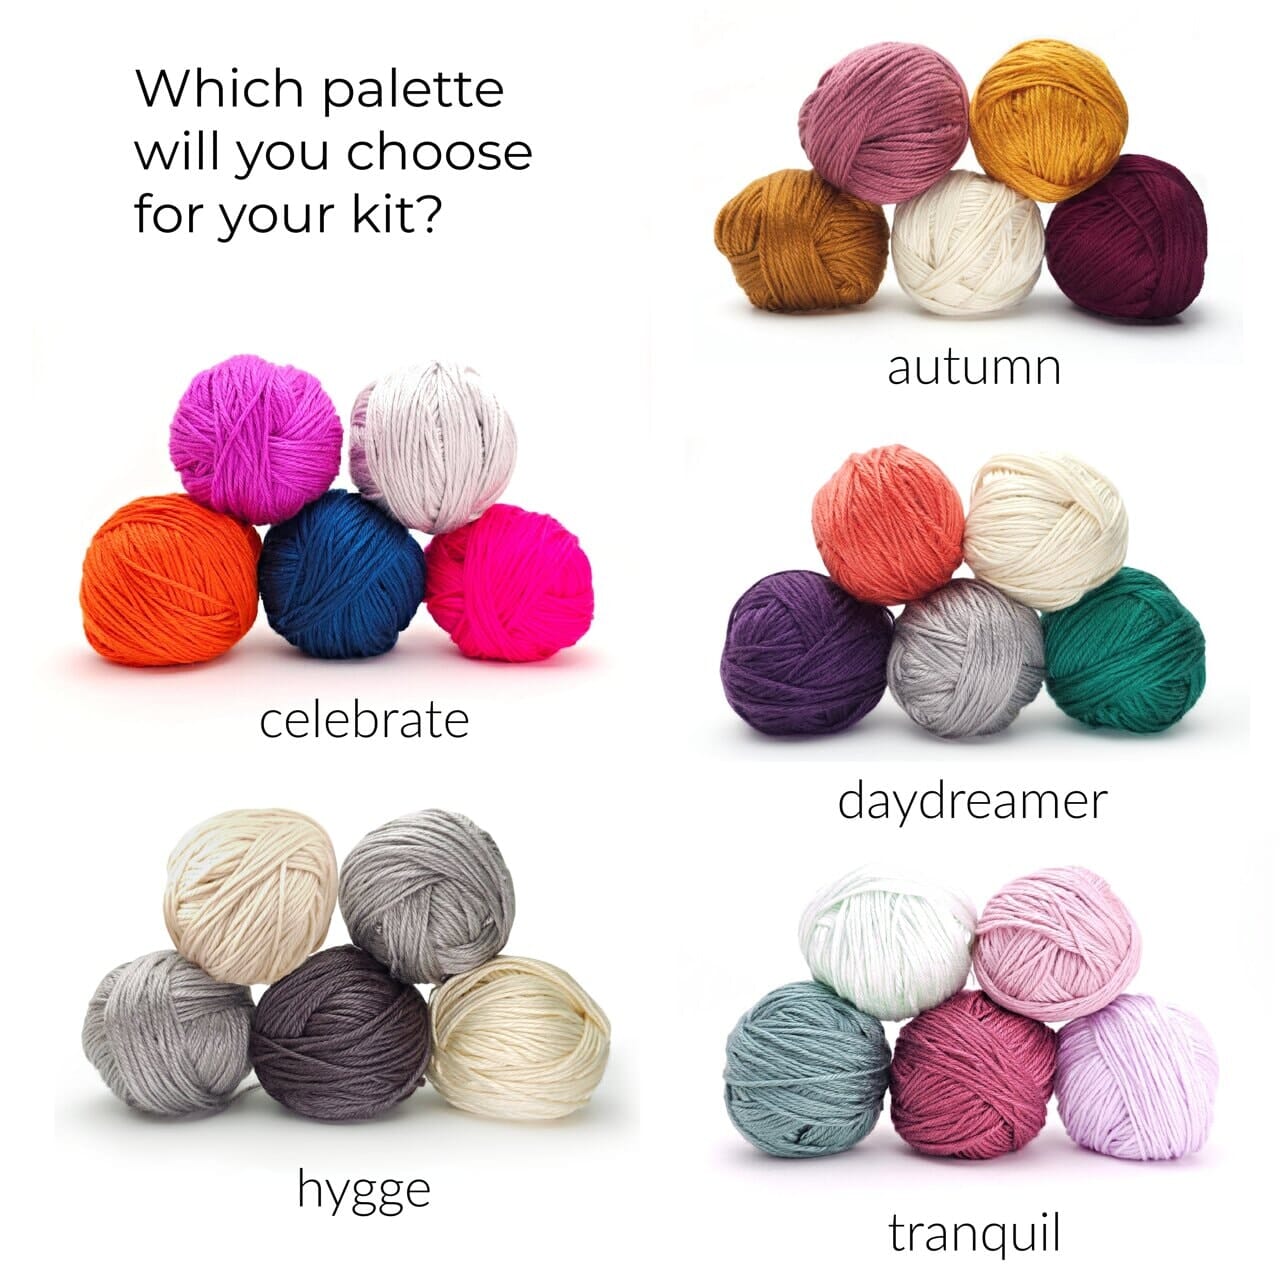 Which palette will you choose for your kit? Autumn, Celebrate, Daydreamer, Hygge, Tranquil